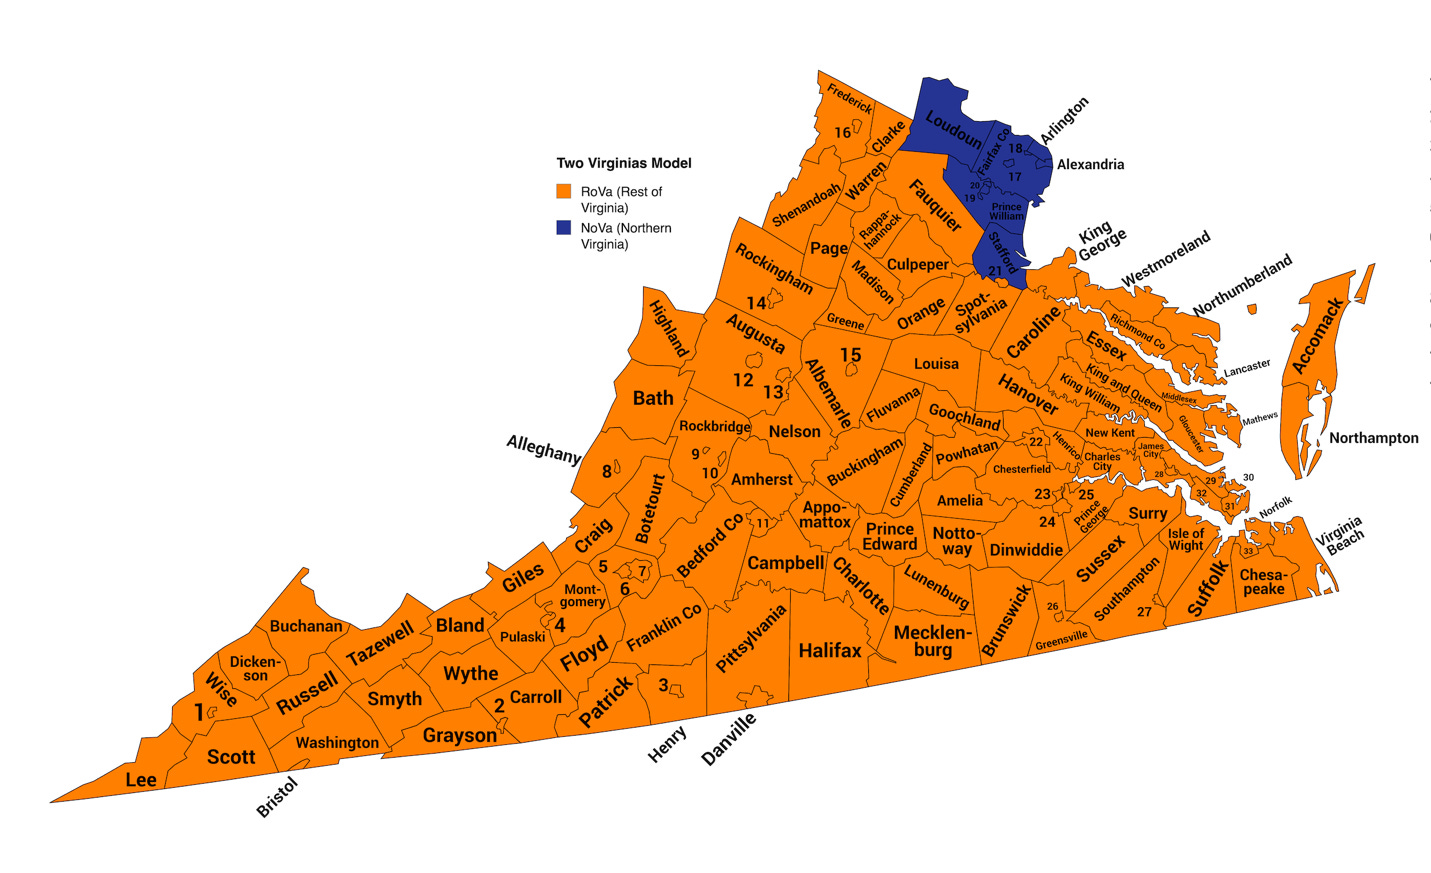 A map of virginia state

Description automatically generated